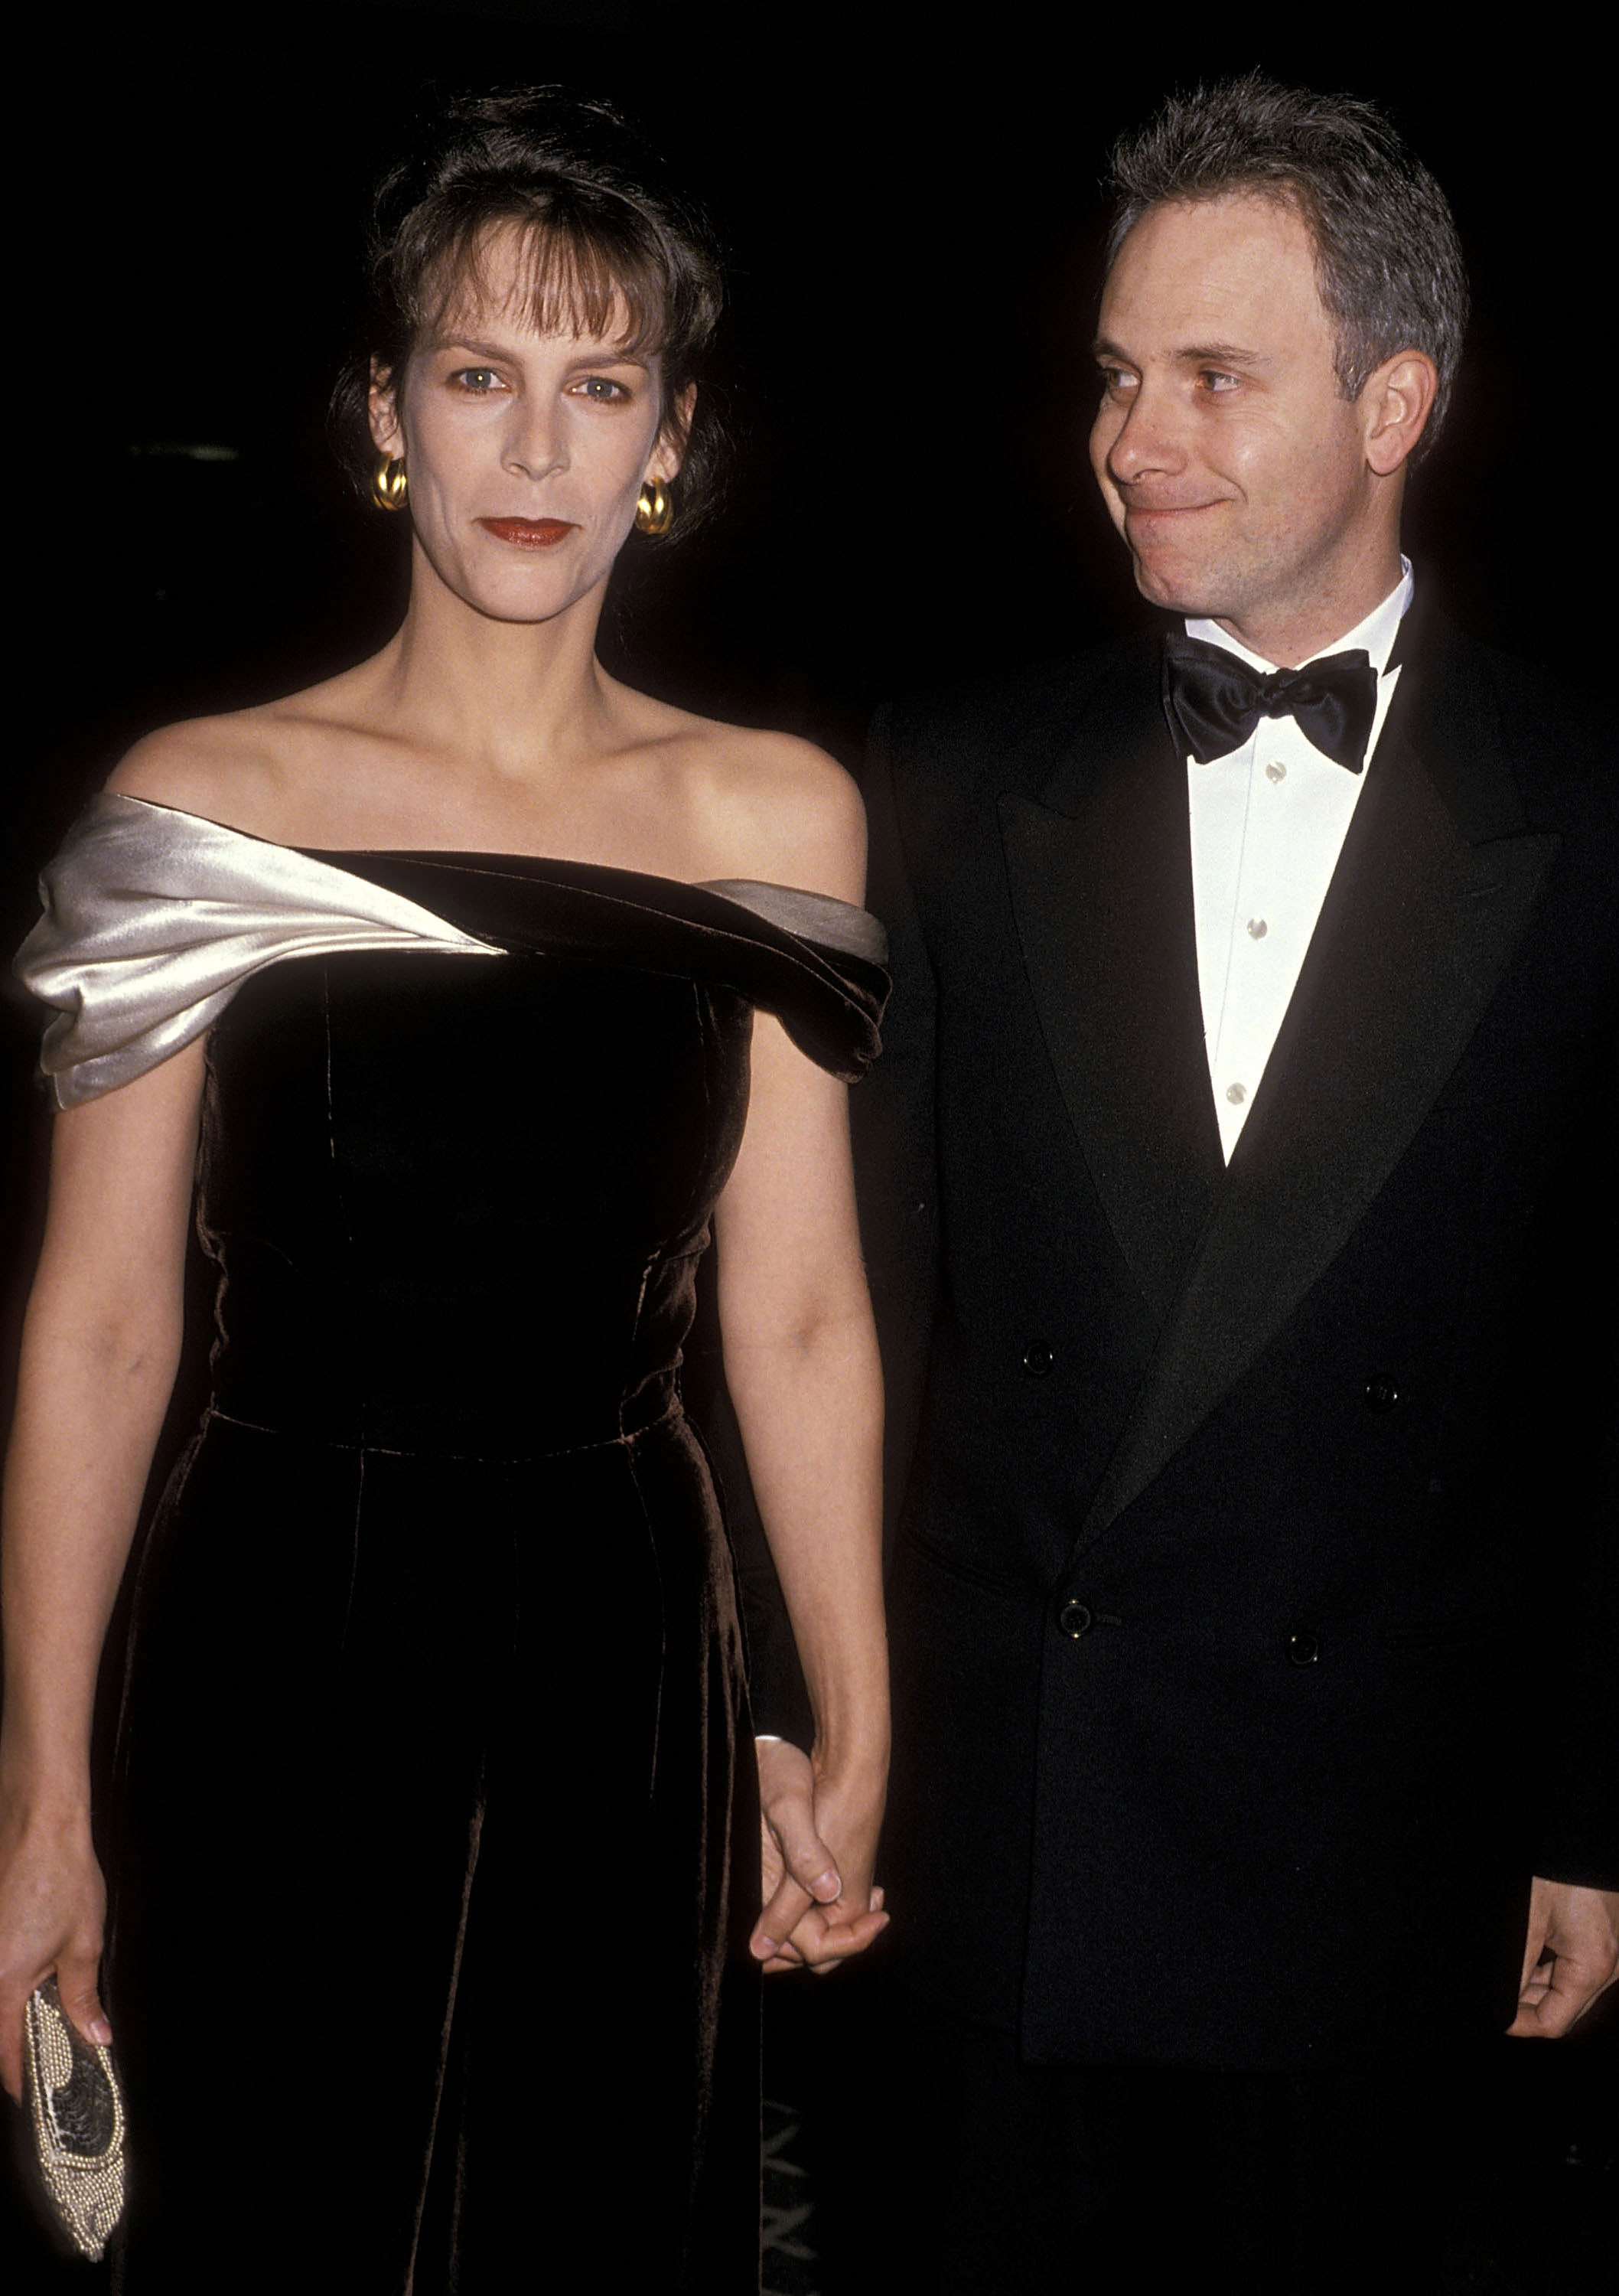 Jamie Lee Curtis and Christopher Guest attend the 47th Annual Golden Globe Awards at Beverly Hilton Hotel in Beverly Hills, California on January 20, 1990. | Source: Getty Images